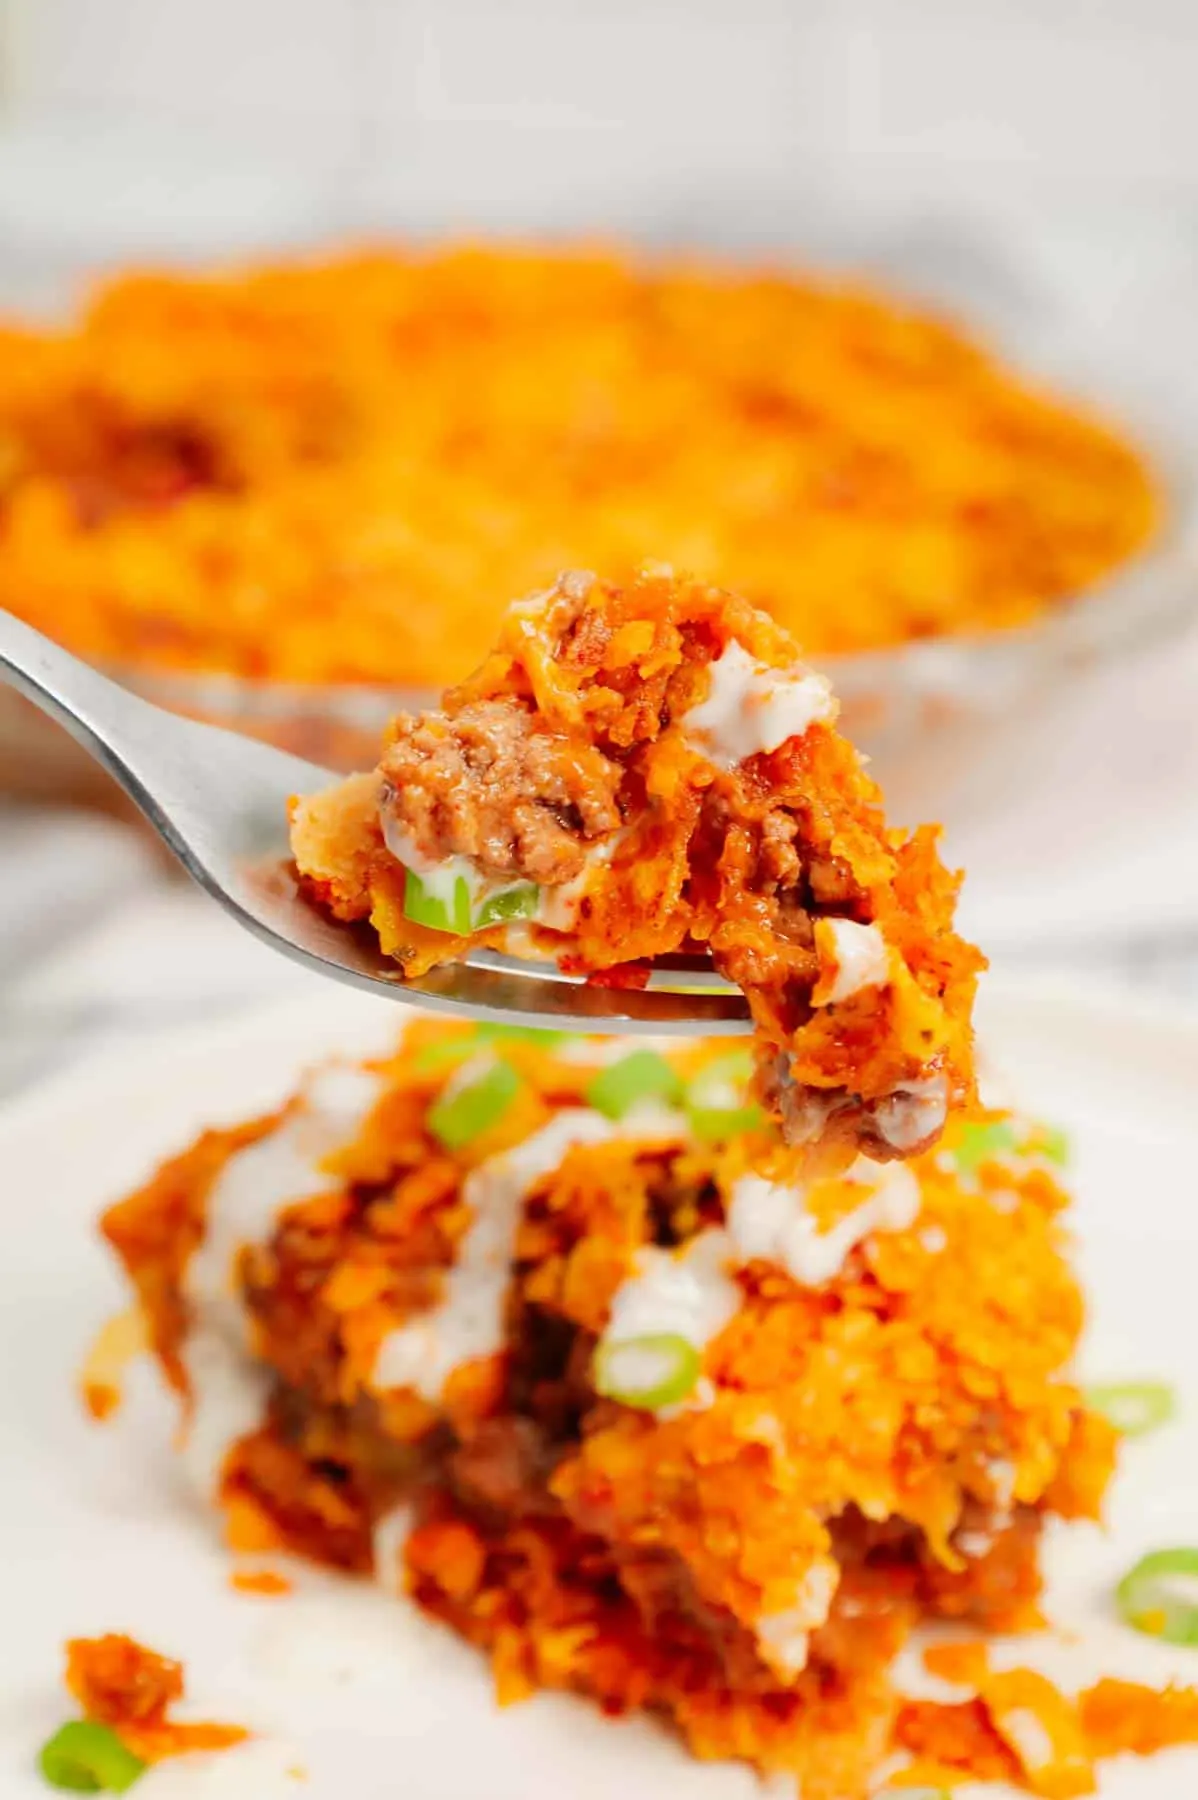 Dorito Taco Pie is an easy ground beef dinner recipe using a store bought deep dish pie crust loaded with crumbled Doritos nacho chips, beef taco meat, ranch dressing, salsa and shredded cheese.